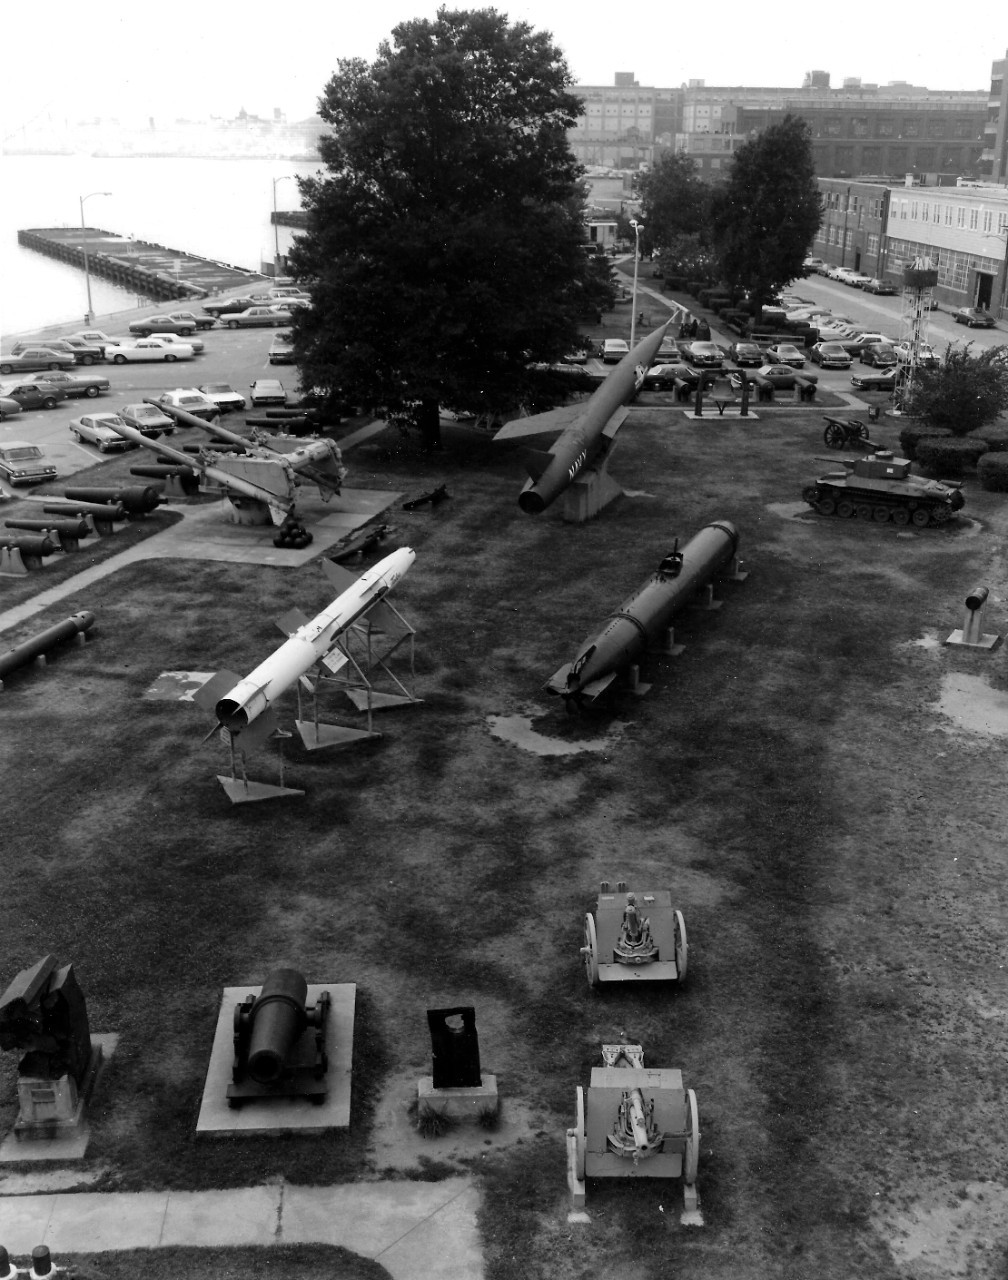 NMUSN-150:  Willard Park, Washington Navy Yard, Washington D.C. 1970s.   View looking west.     Top section (left to right):  Talos missile, Terrier Missile;  surface to air missiles and launcher; Regulus II missile; Japanese two-man submarine; Type 97 Medium Tank (Chi-Ha) (Japan); 16” gun.    Back:  High altitude probe launching system.   Front:  Armor plating; 12” gun and crib; 6” armor plate; and 3” MKIV guns.    National Museum of the U.S. Navy Photograph Collection.  